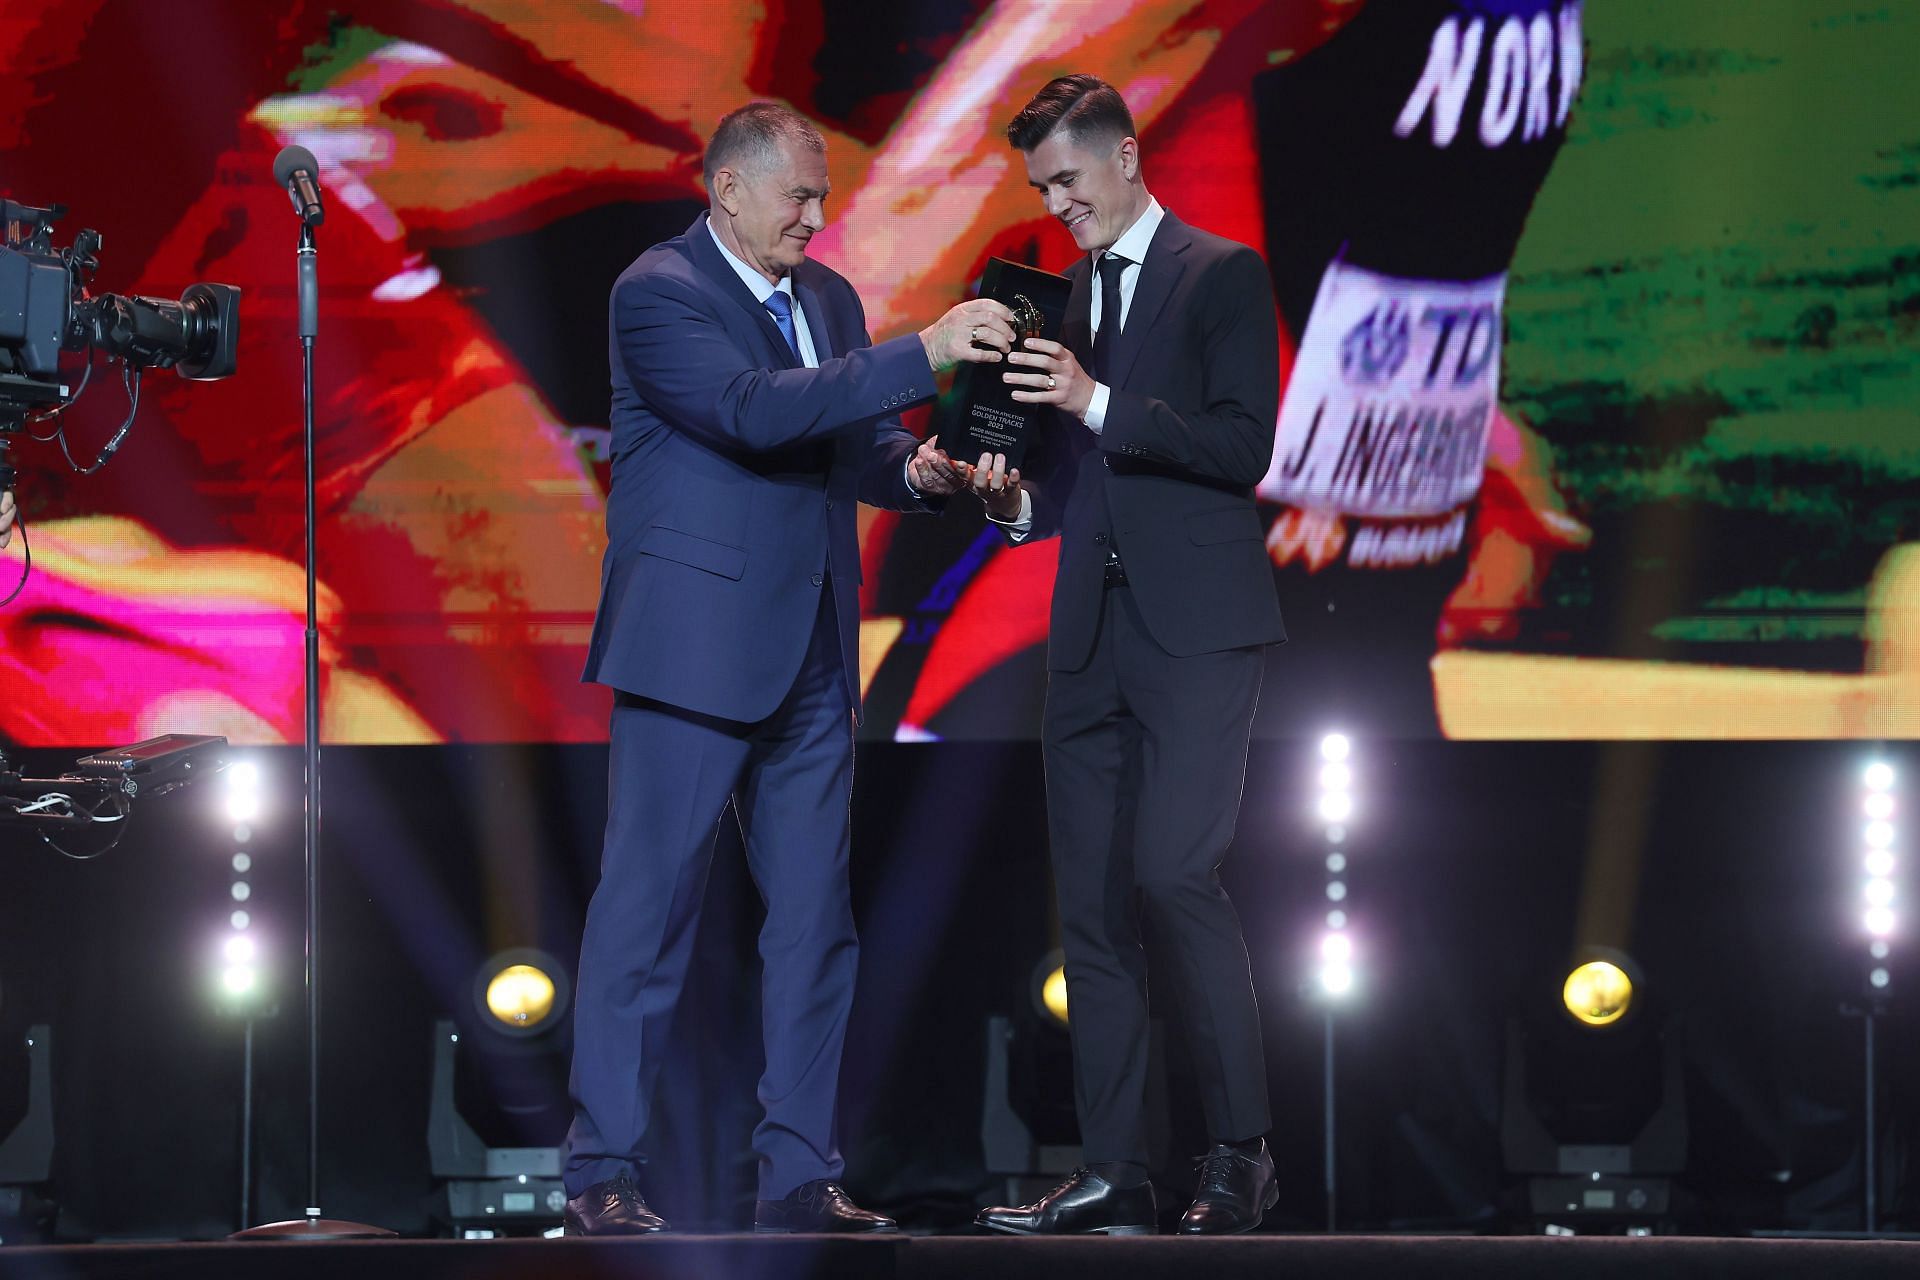 Jakob Ingebrigtsen was awarded the 2023 European Athlete of the Year title at the 2023 Golden Tracks awards (Photo by Joosep Martinson/Getty Images)